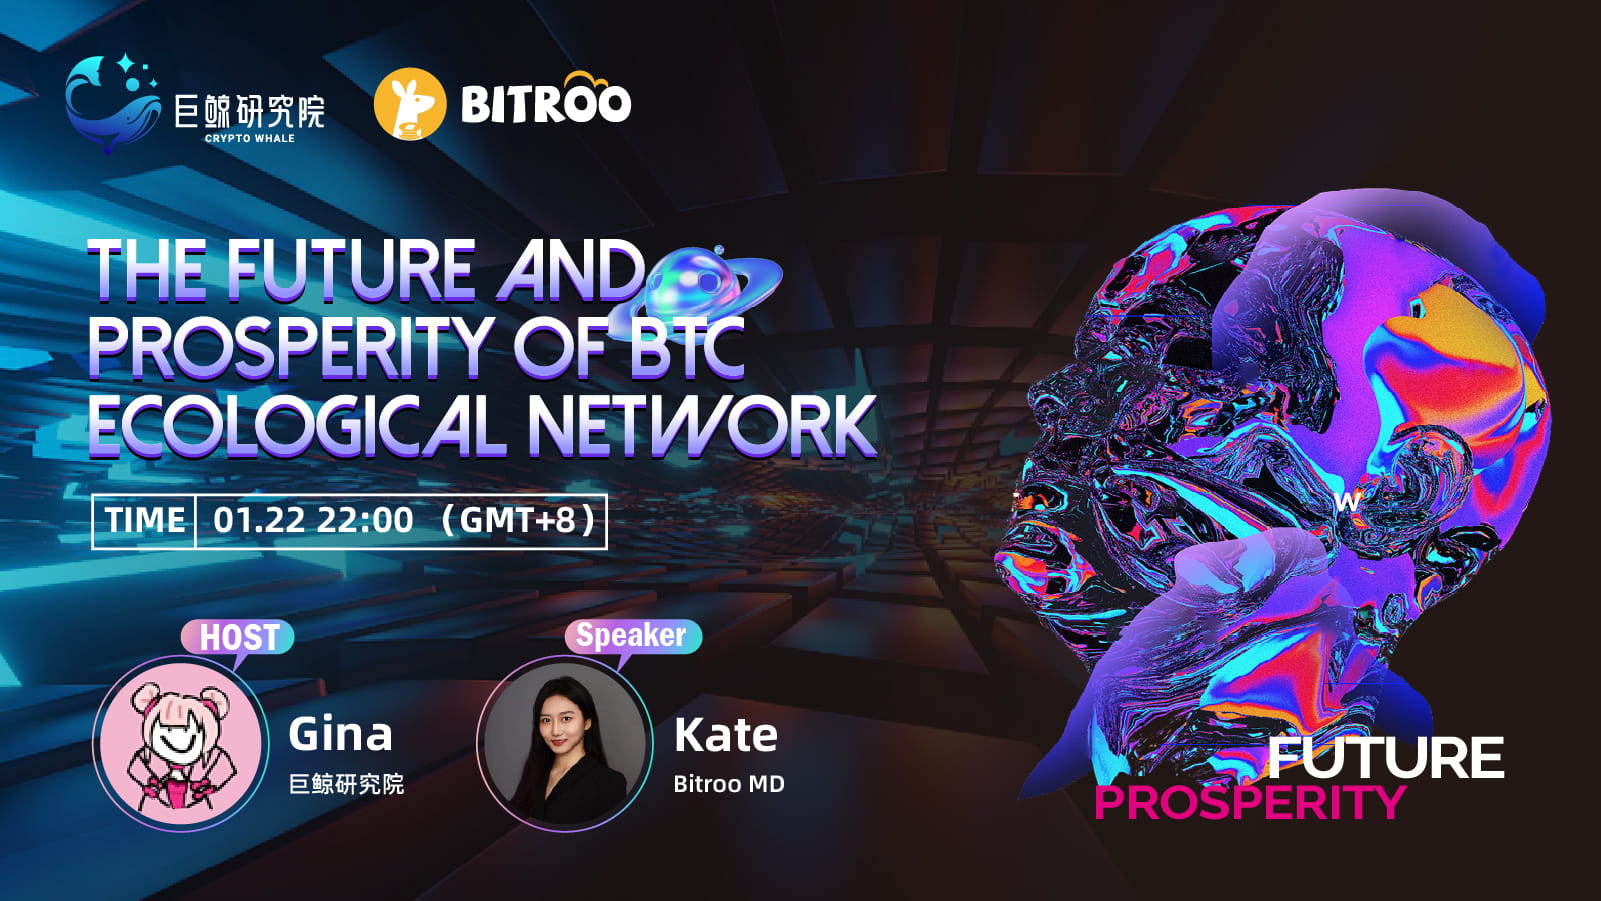 The future and prosperity of BTC ecological network